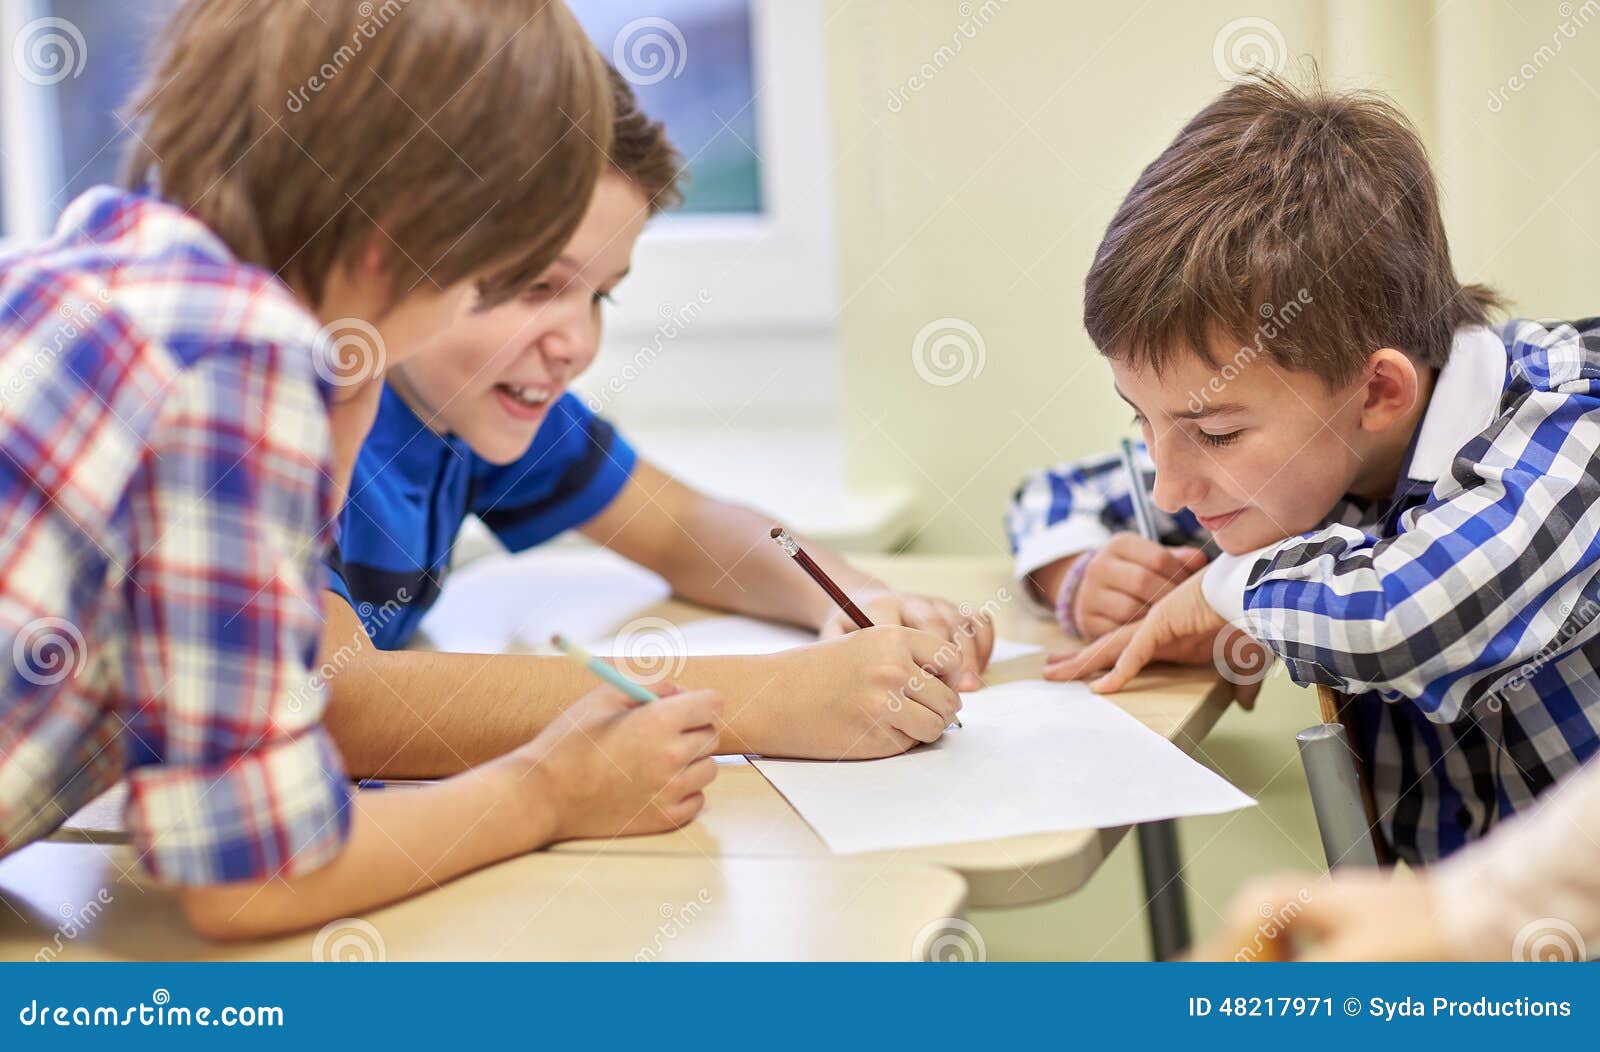 group of schoolboys writing or drawing at school